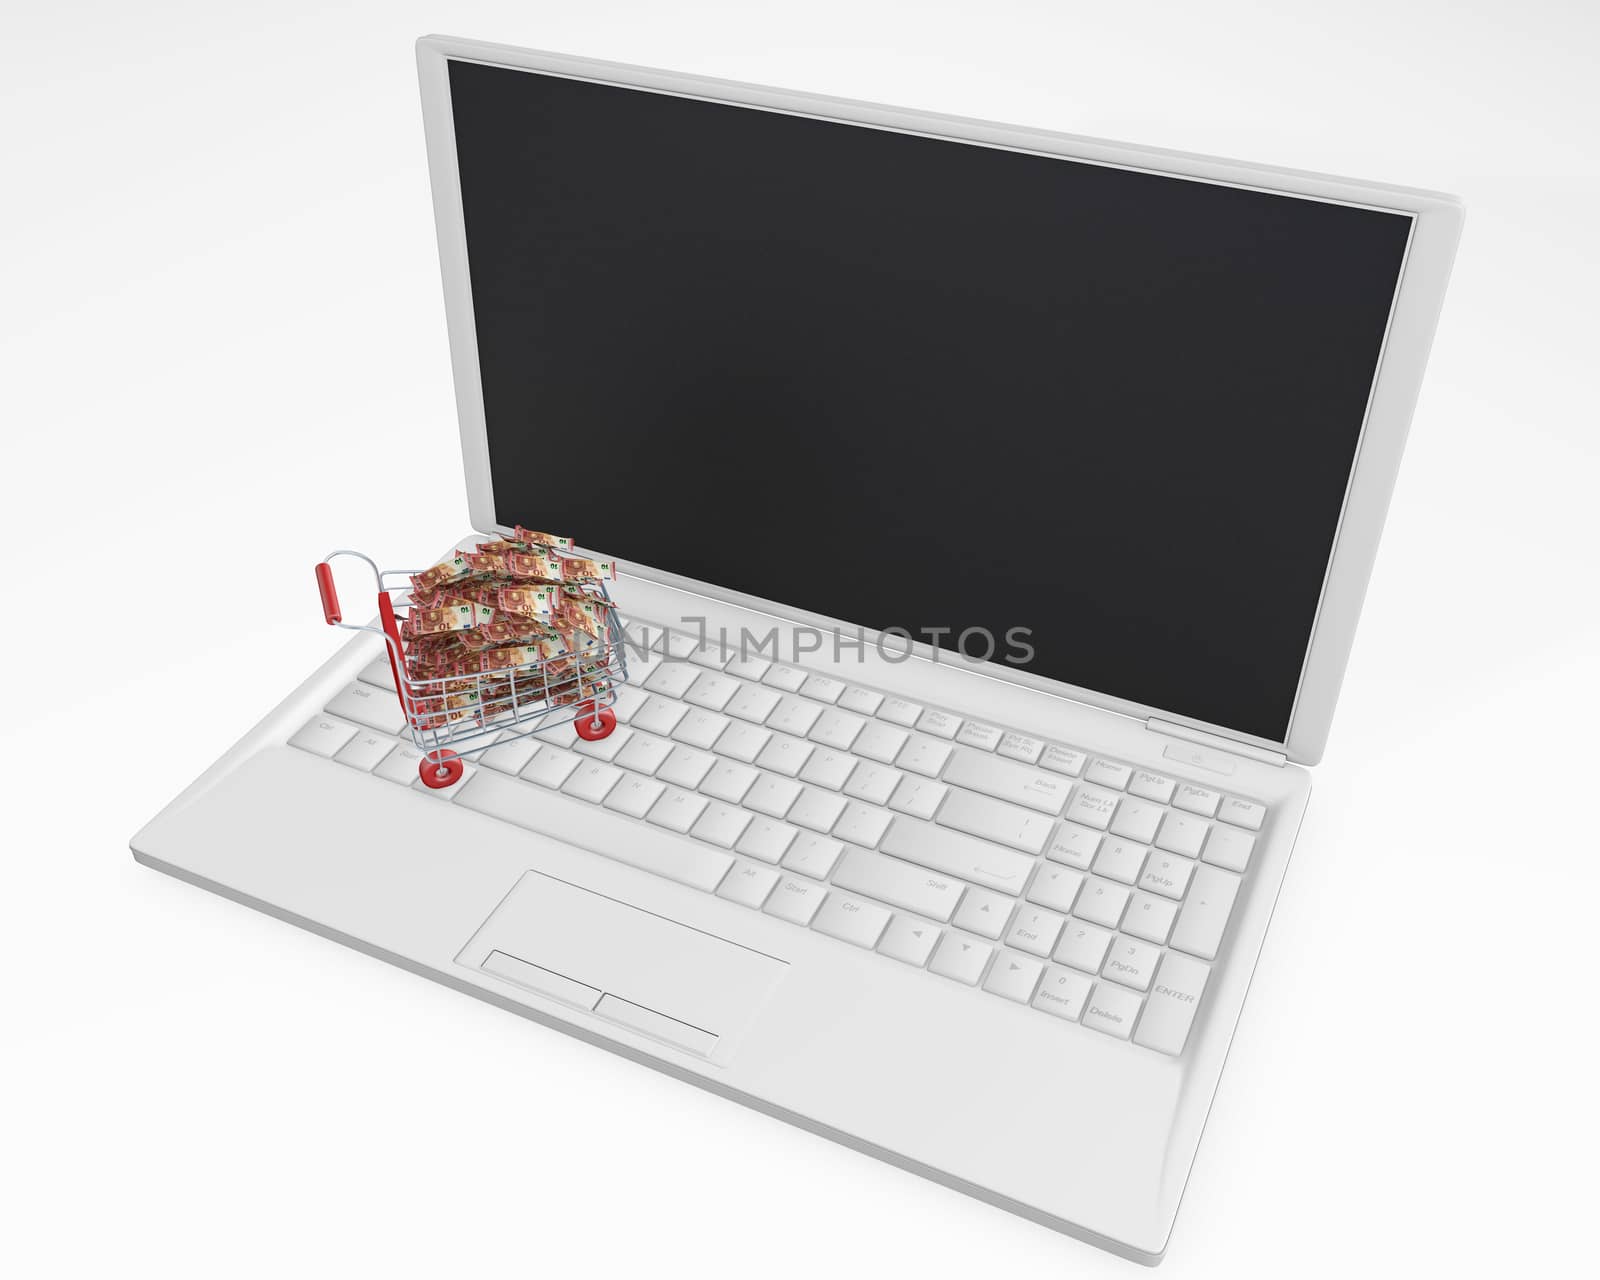 Shopping Cart on a laptop full of money euros 3d rendering by F1b0nacci